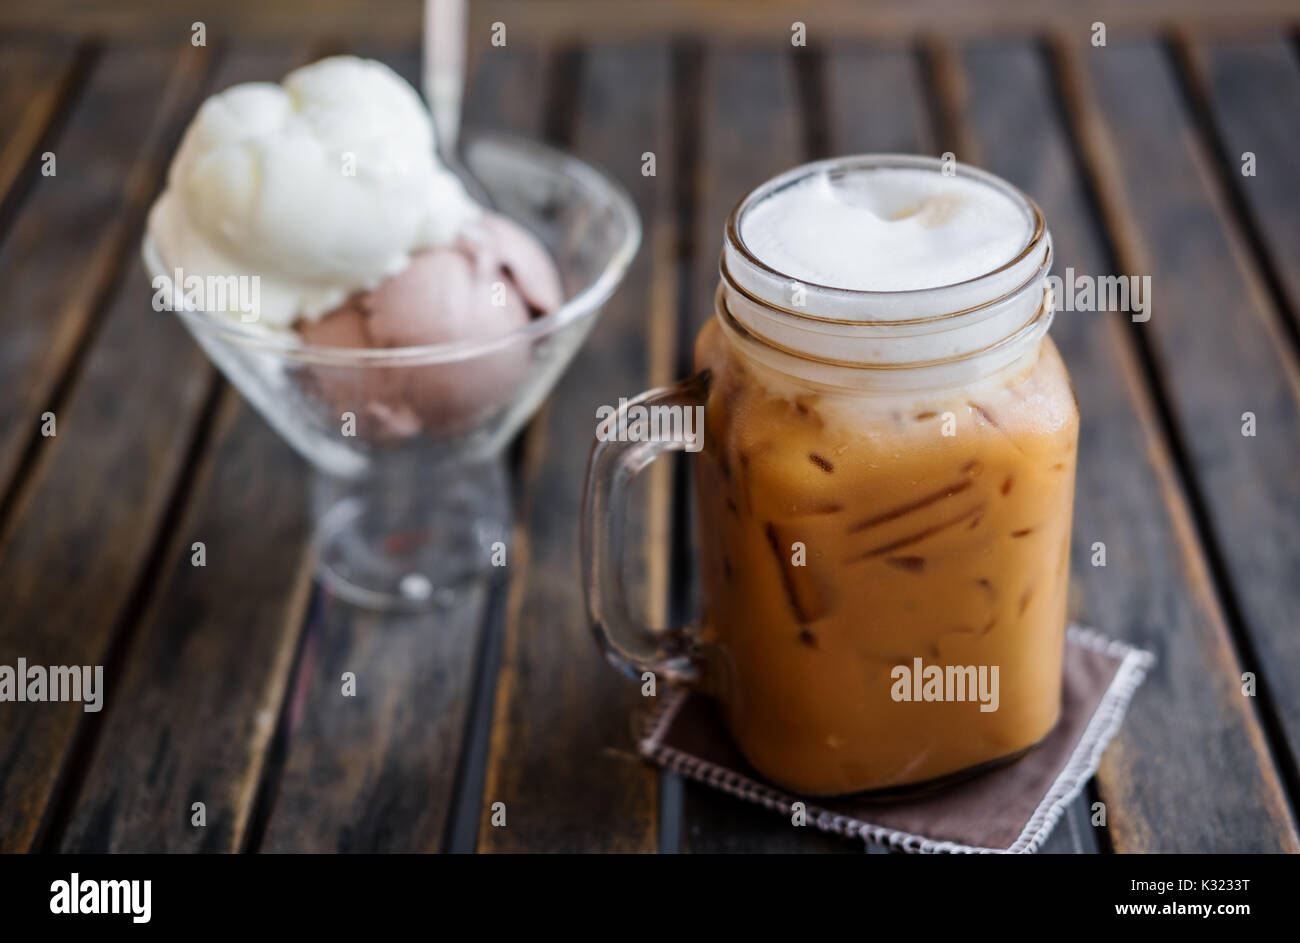 Iced Coffee with Ice Creams on wooden table, selective focus on Coffee Cup, Summer Dessert Stock Photo